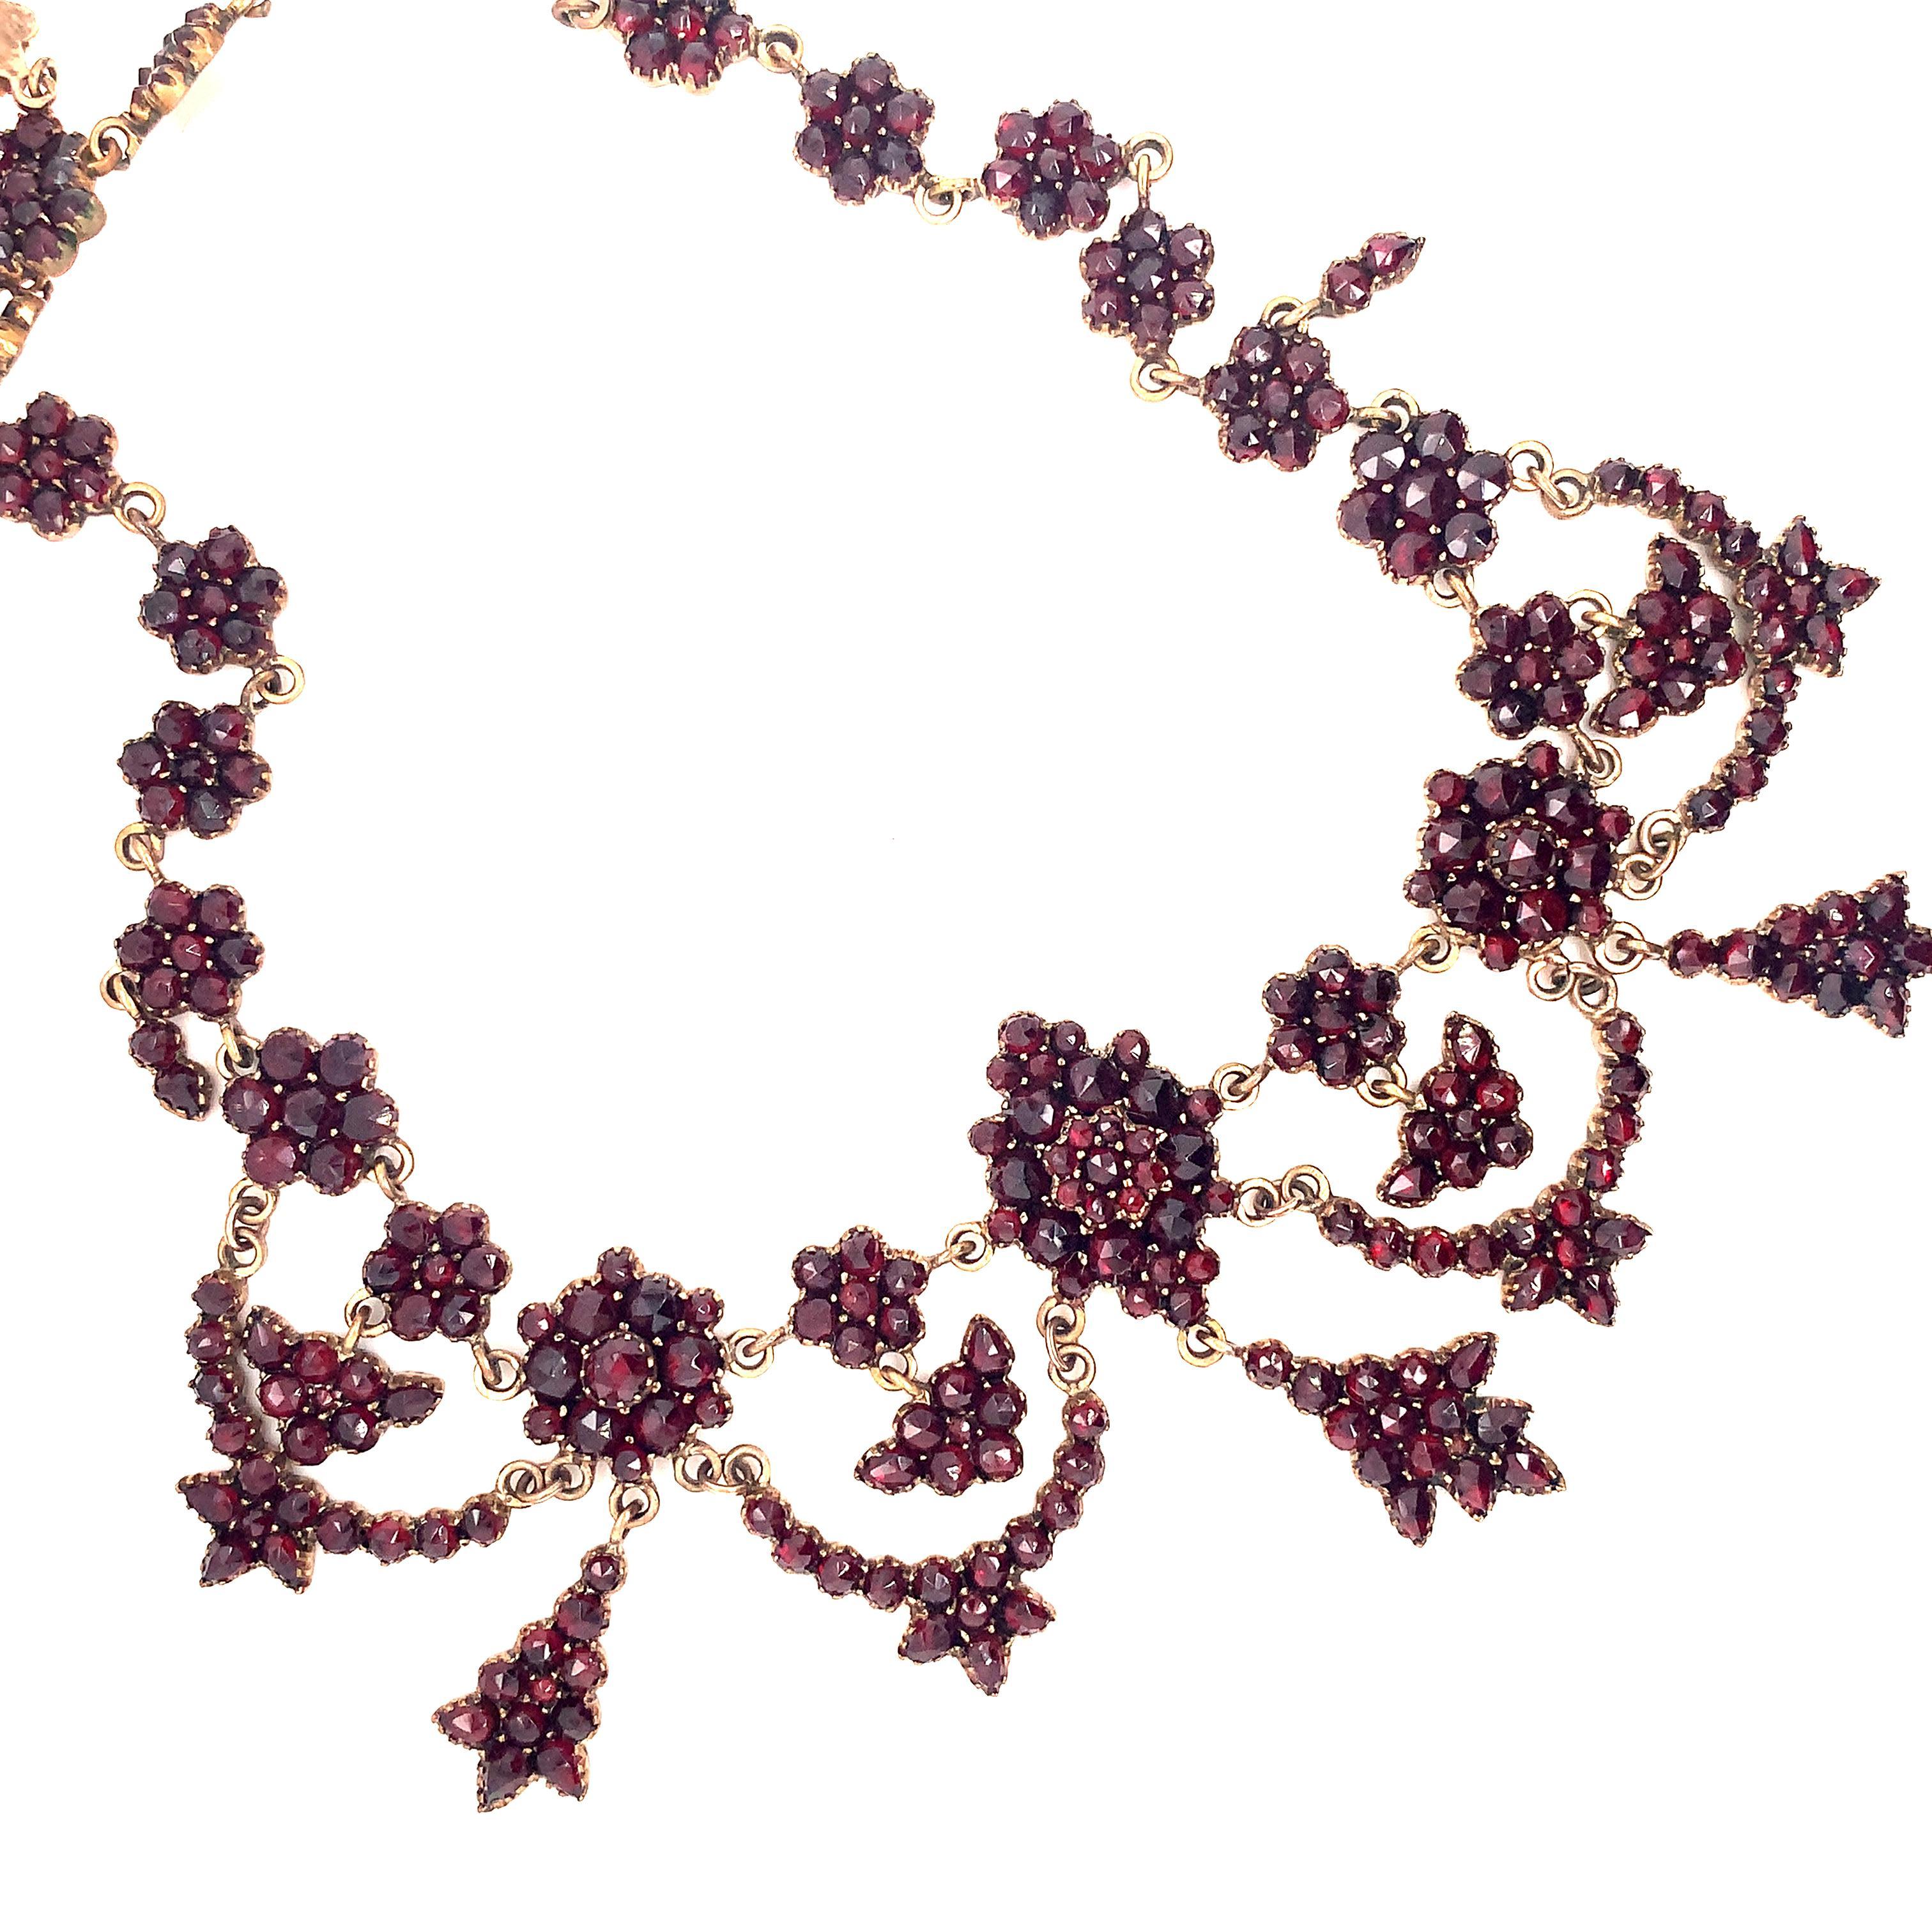 Victorian gilt jewelers brass Bohemian garnet necklace with rose cut garnets.There is a larger oval rosette in the center with a drop, 2 medium rosettes with drops and 4 swags. There are 26 small rosettes and a rectangular garnet clasp. The necklace